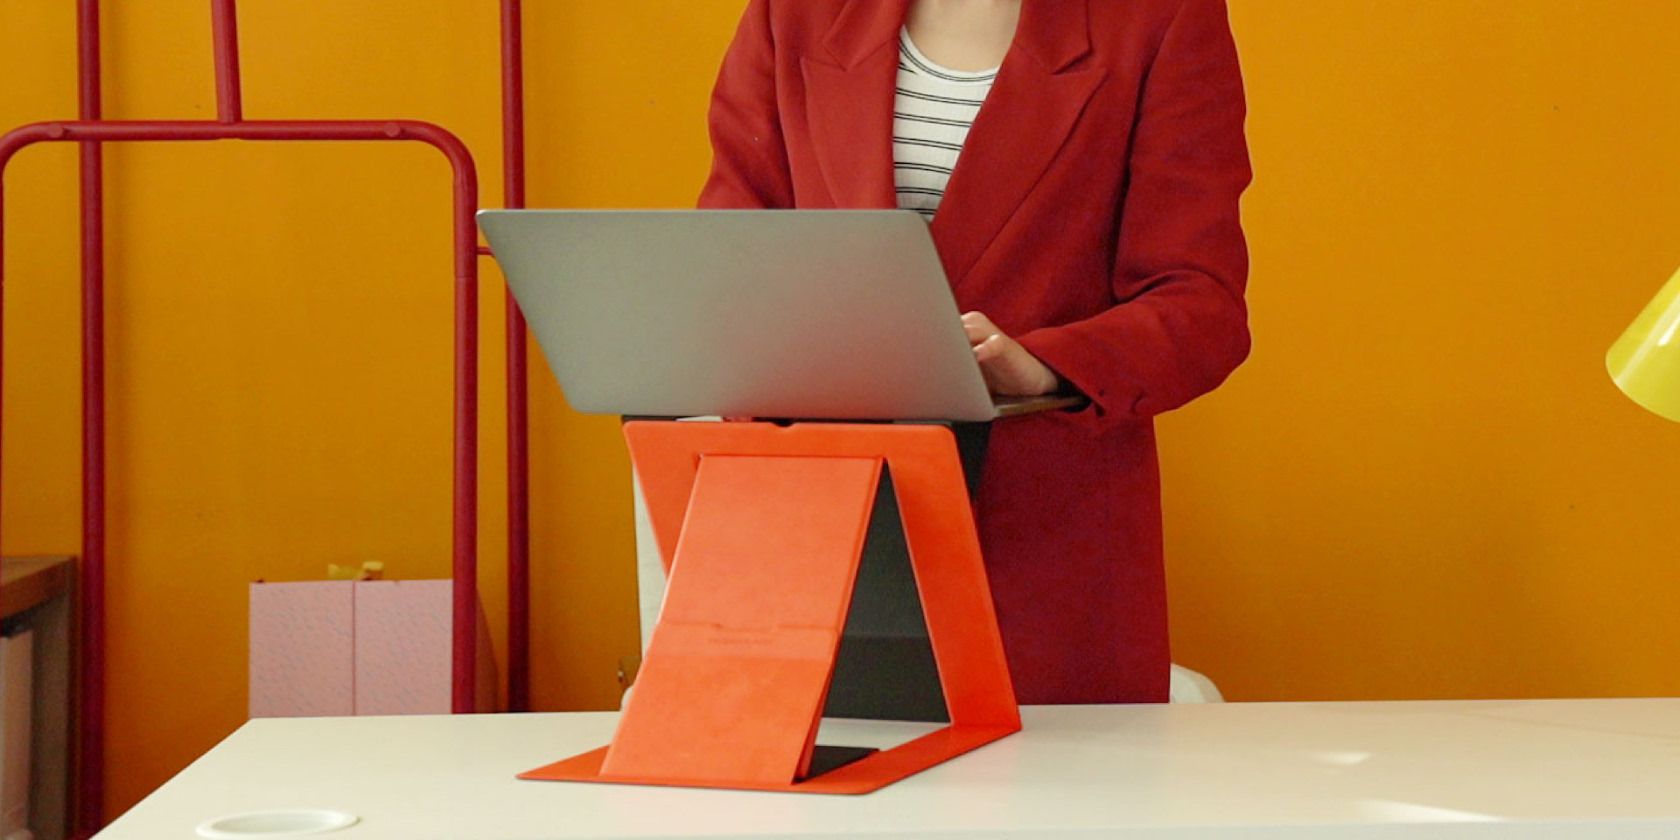 MOFT Z, the world's thinnest, foldable sit-stand laptop desk